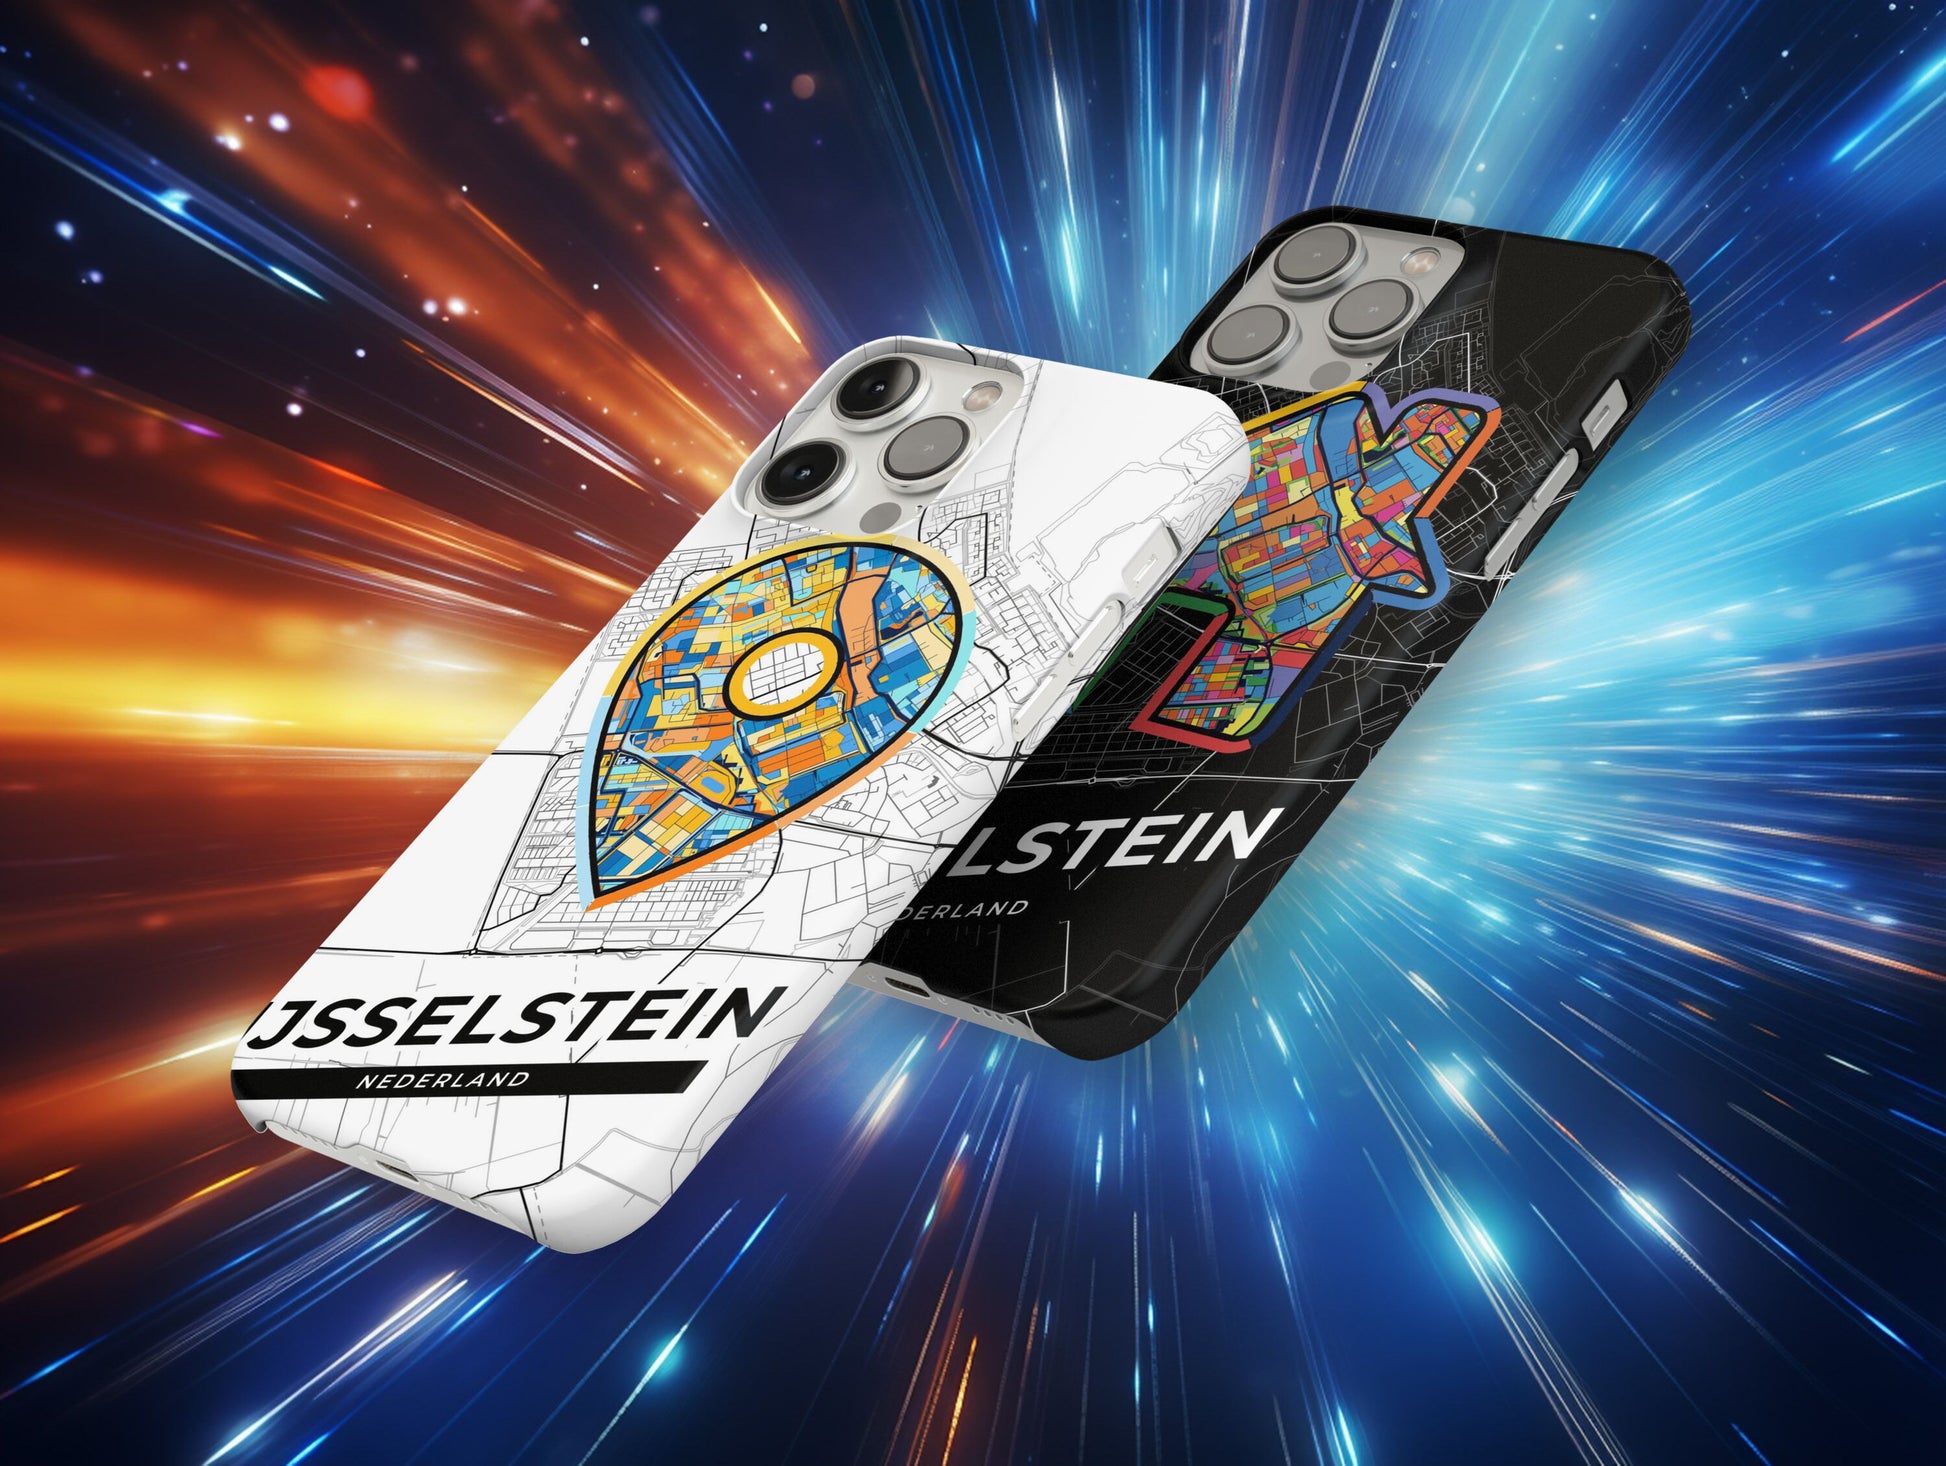 Ijsselstein Netherlands slim phone case with colorful icon. Birthday, wedding or housewarming gift. Couple match cases.